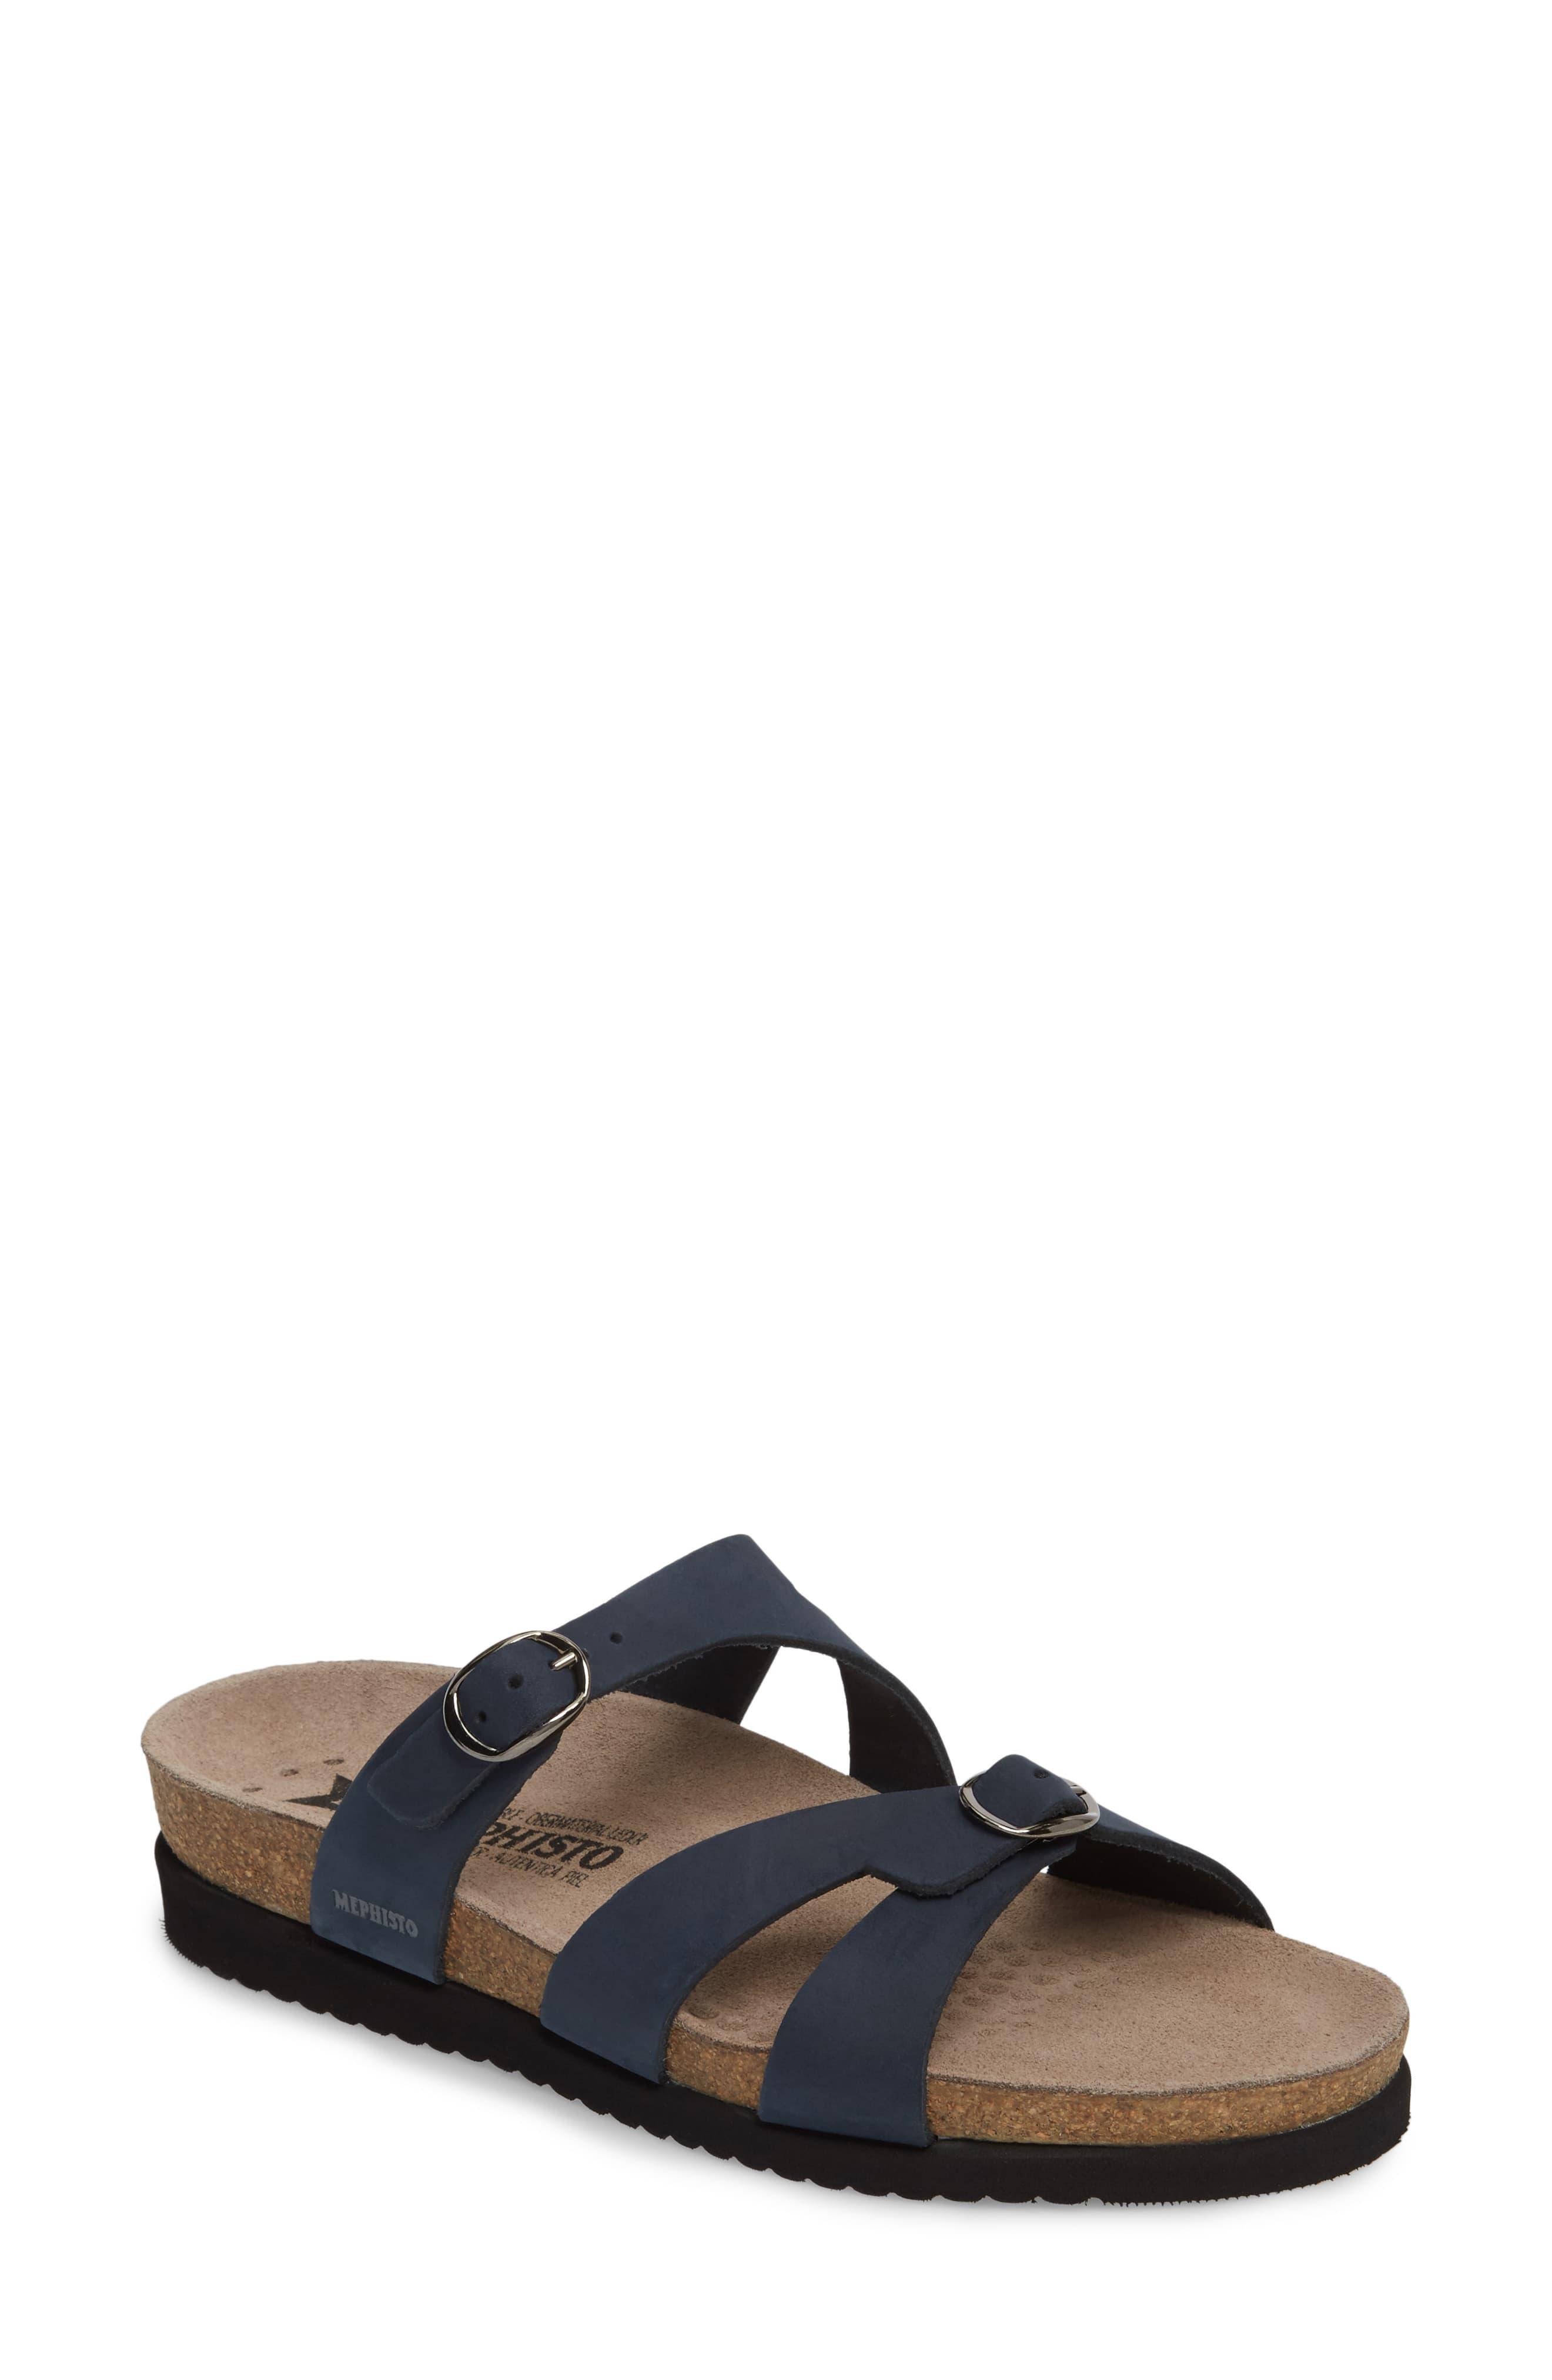 Mephisto 'hannel' Sandal in Coral Nubuck Leather (Blue) - Save 33% - Lyst